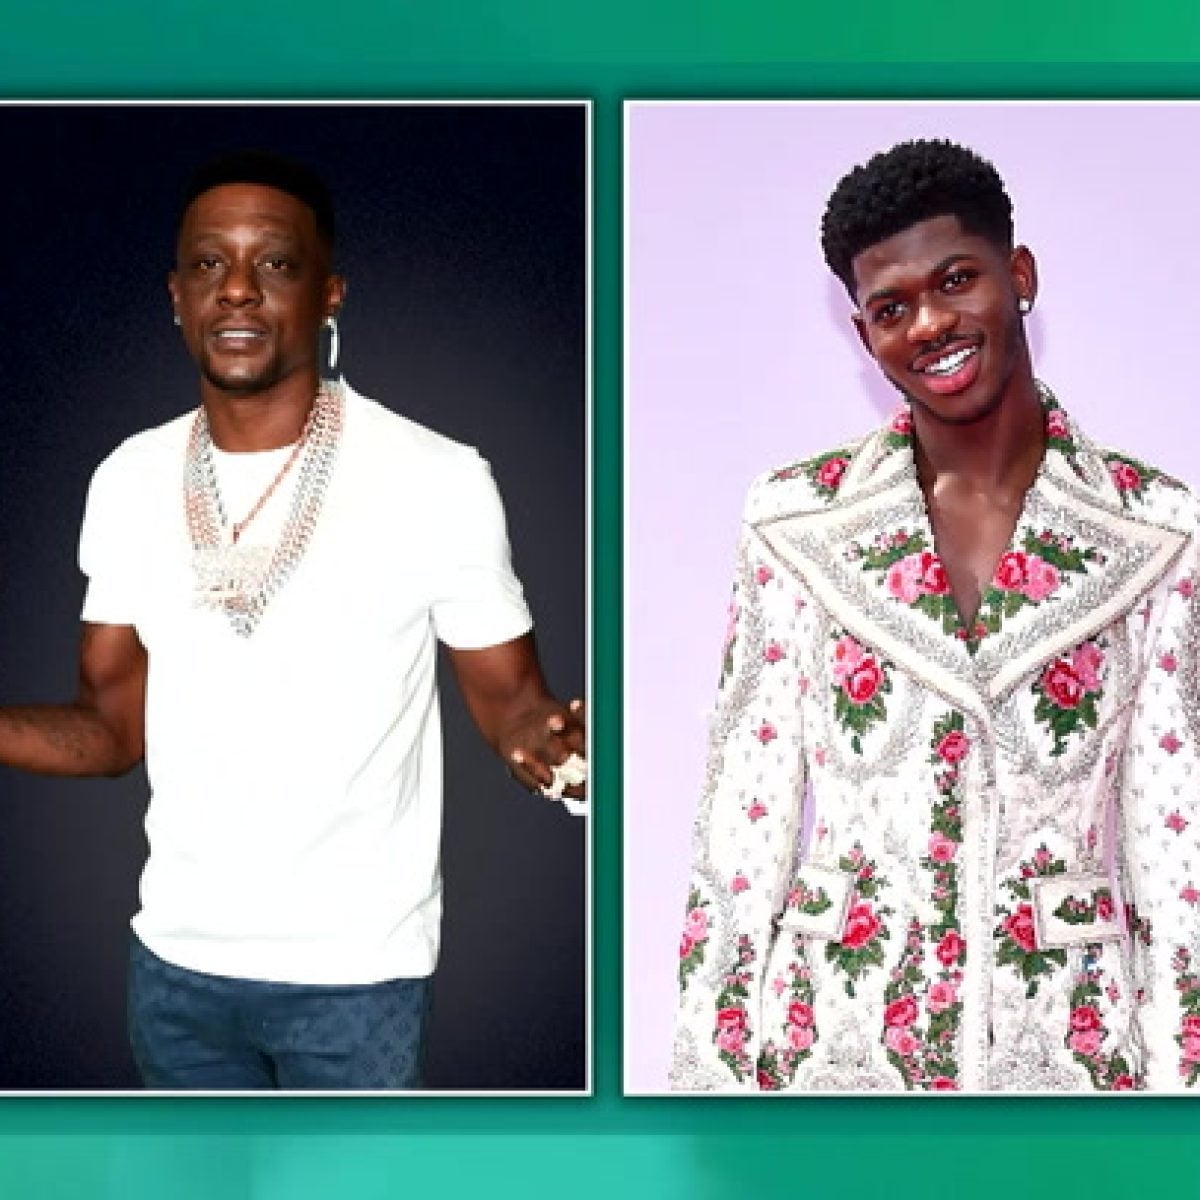 The Social Feed with Essence – Boosie vs Lil Nas X